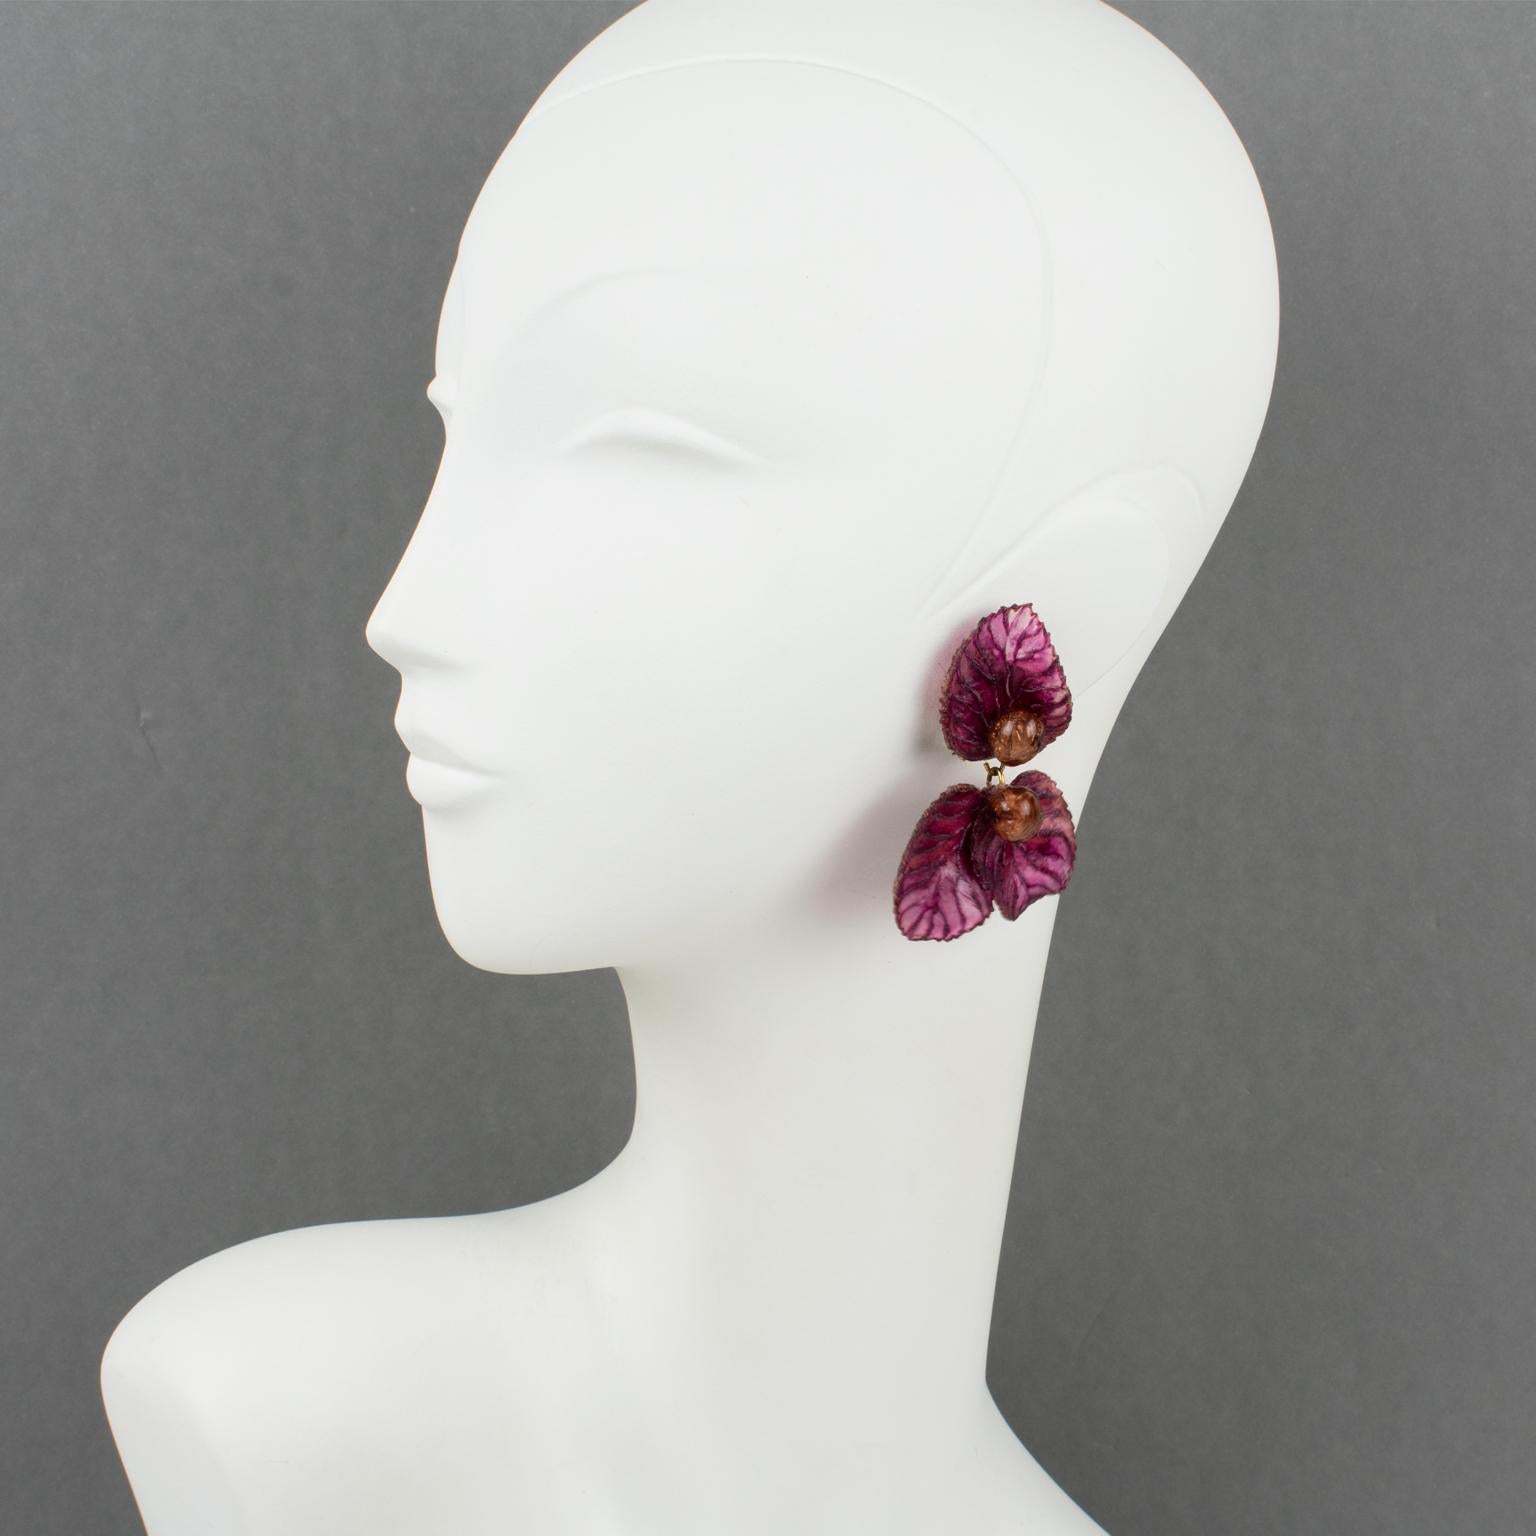 Cilea Paris created these charming resin clip-on earrings for French jewelry designer Francoise Montague. The pieces feature a dangling shape, all carved and textured, with leaves and bay fruit designs in transparent dusty pink with fuchsia pink